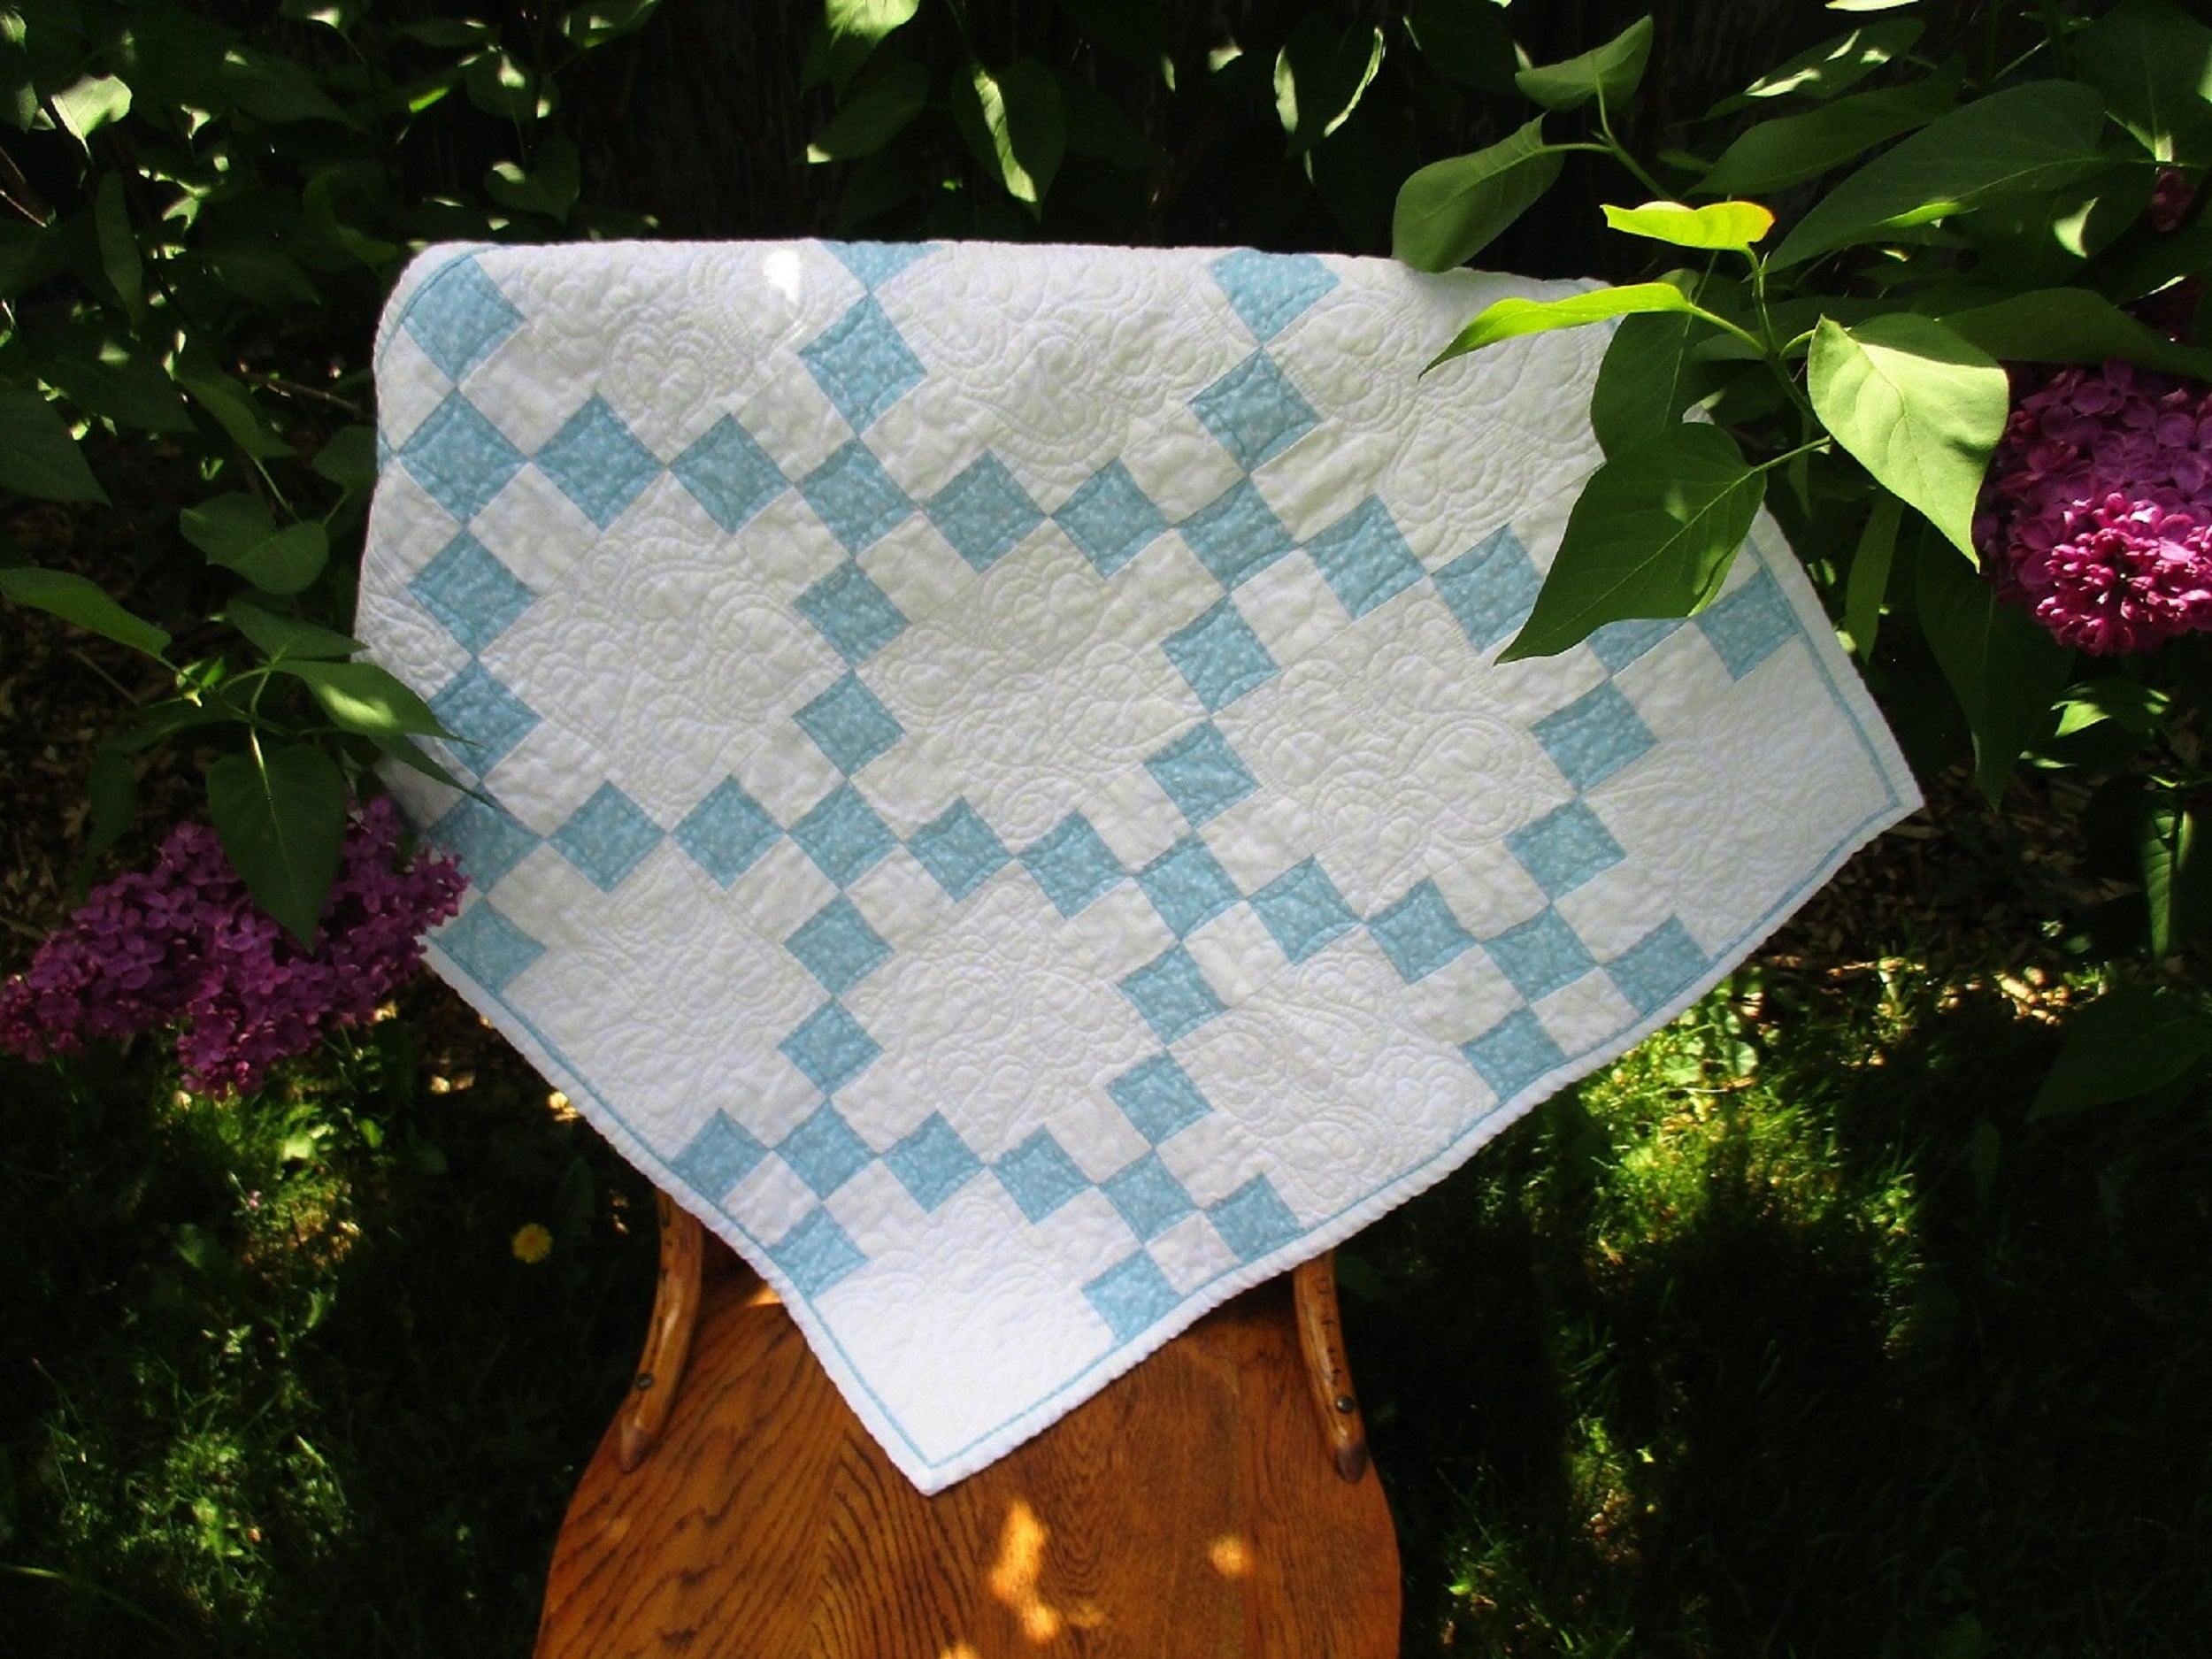 This small blue and white nine patch quilt is shown outdoors over the back of a wooden chair, in front of a lilac bush. 